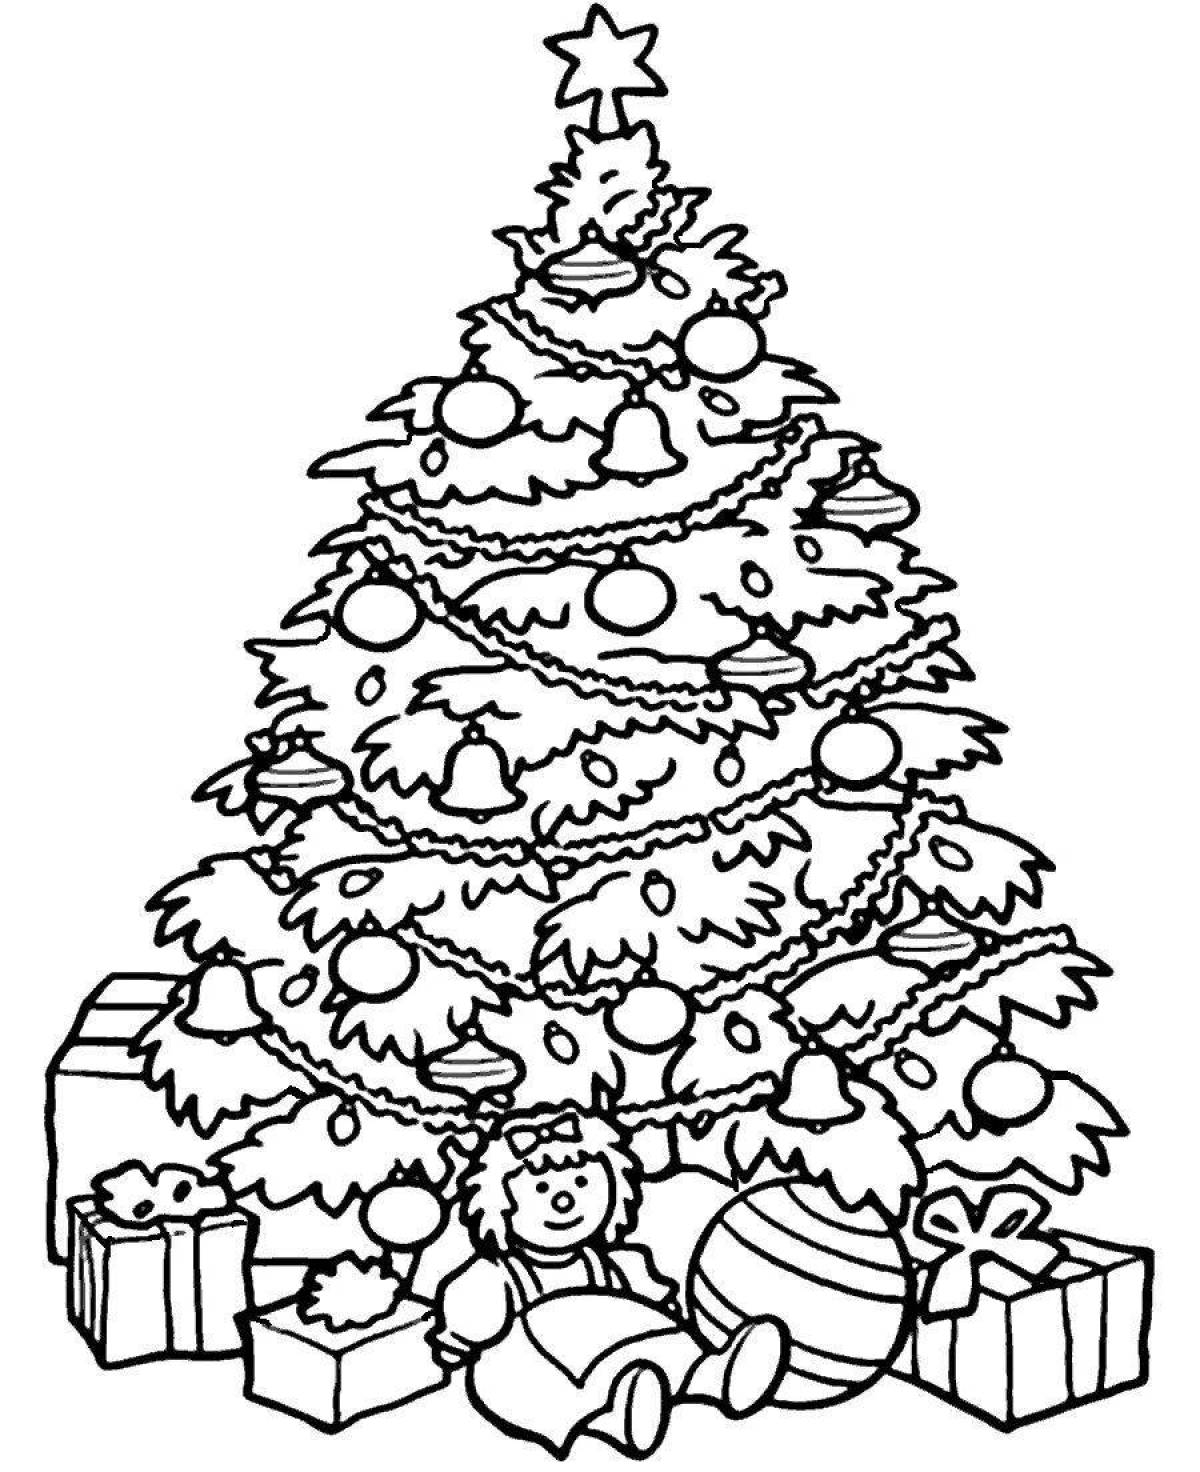 Coloring card colorful Christmas tree